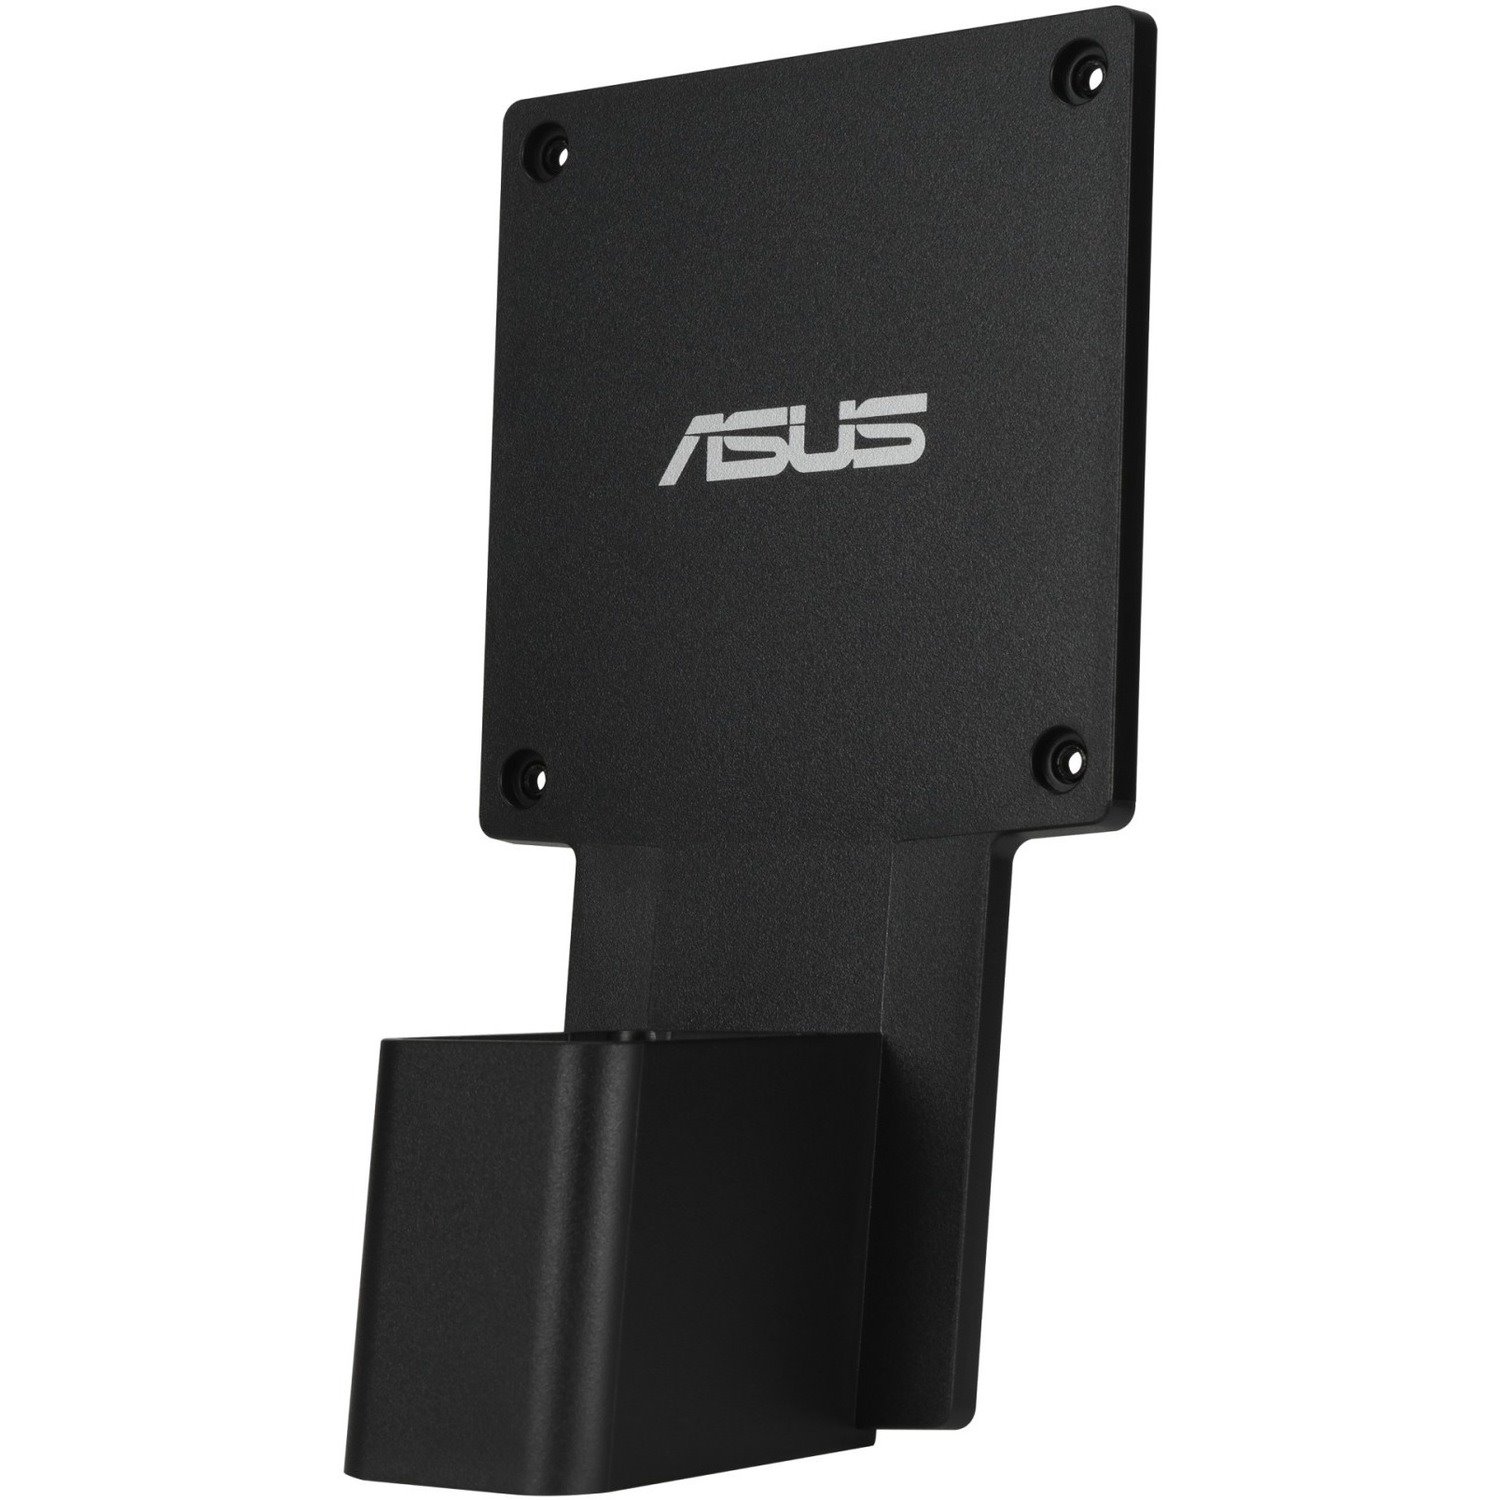 Asus MKT02 Mounting Adapter for Mini PC - Black